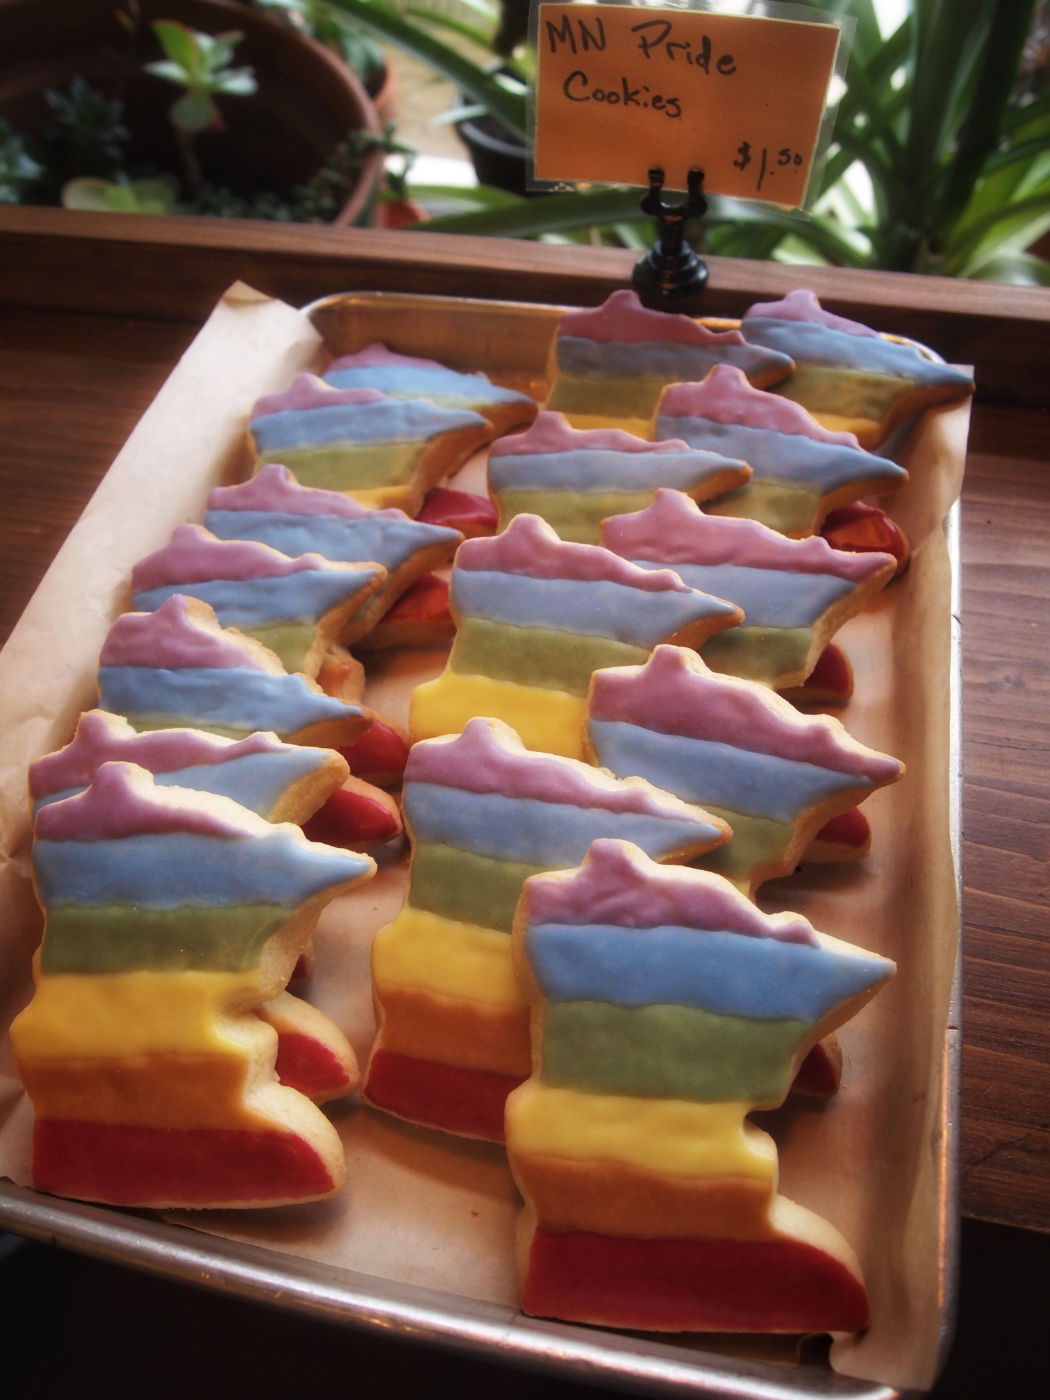 Tray of Minnesota state-shaped rainbow-frosted cookies.